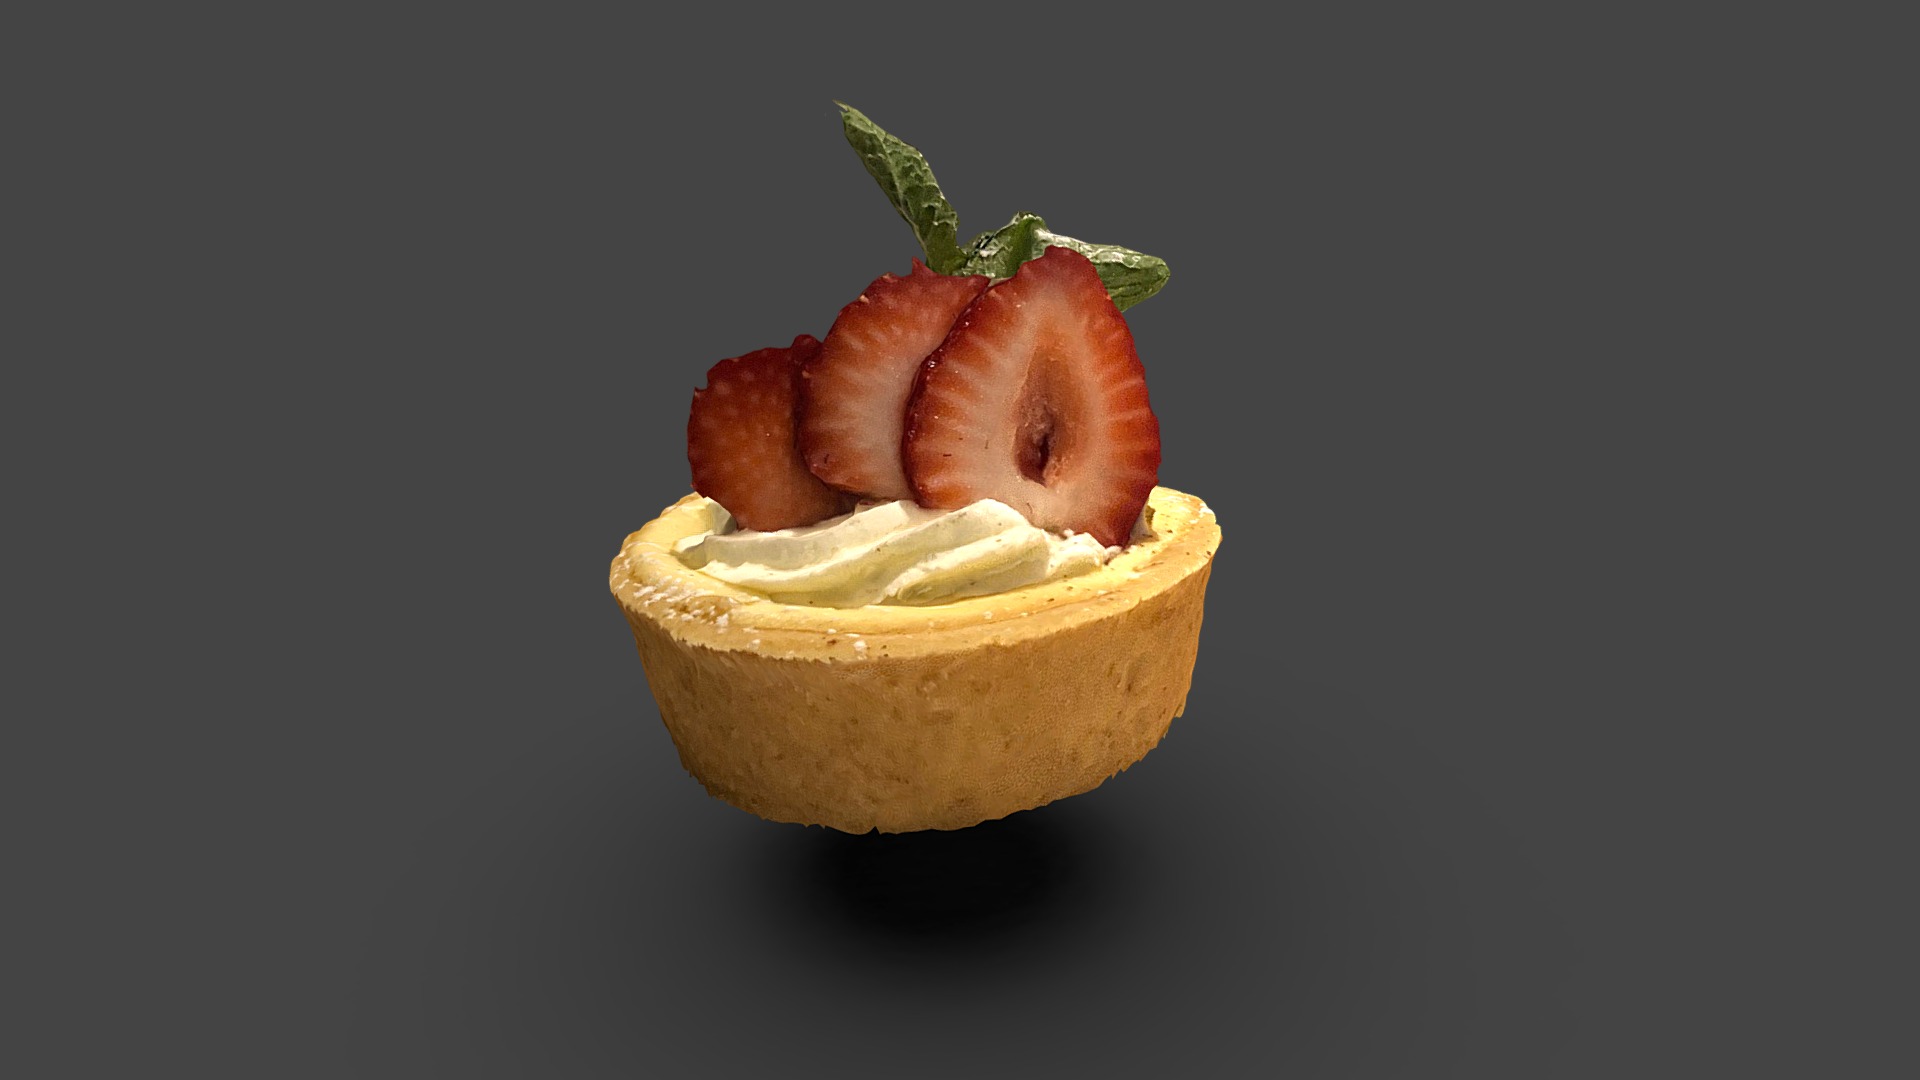 Italian cheese cake, whipped cream, wild berries. Taken at the latest Sketchfab team dinner.

Generated with photogrammetry software 3DF Zephyr v4.351 processing 53 images - Torta di Ricotta cake - Buy Royalty Free 3D model by Guillermo Sainz (@guillermosainz) 3d model